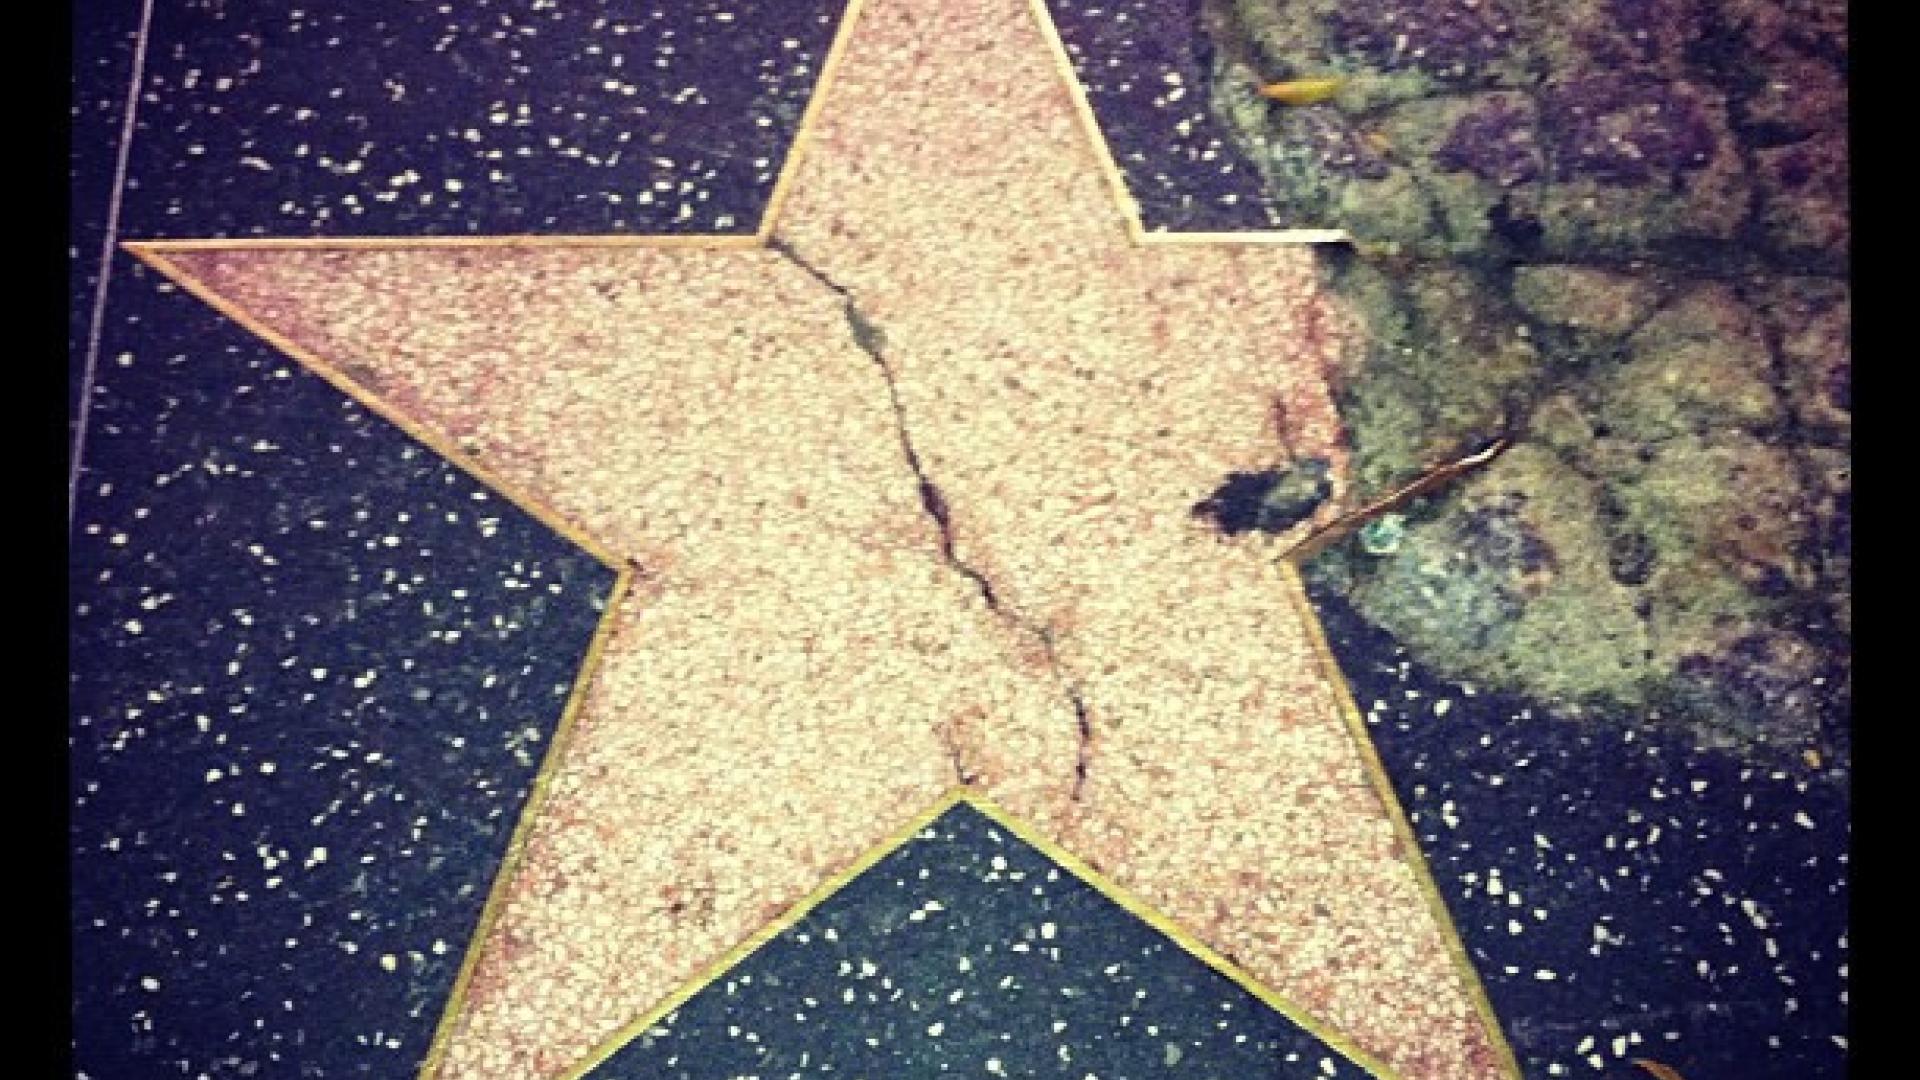 image of Hollywood star